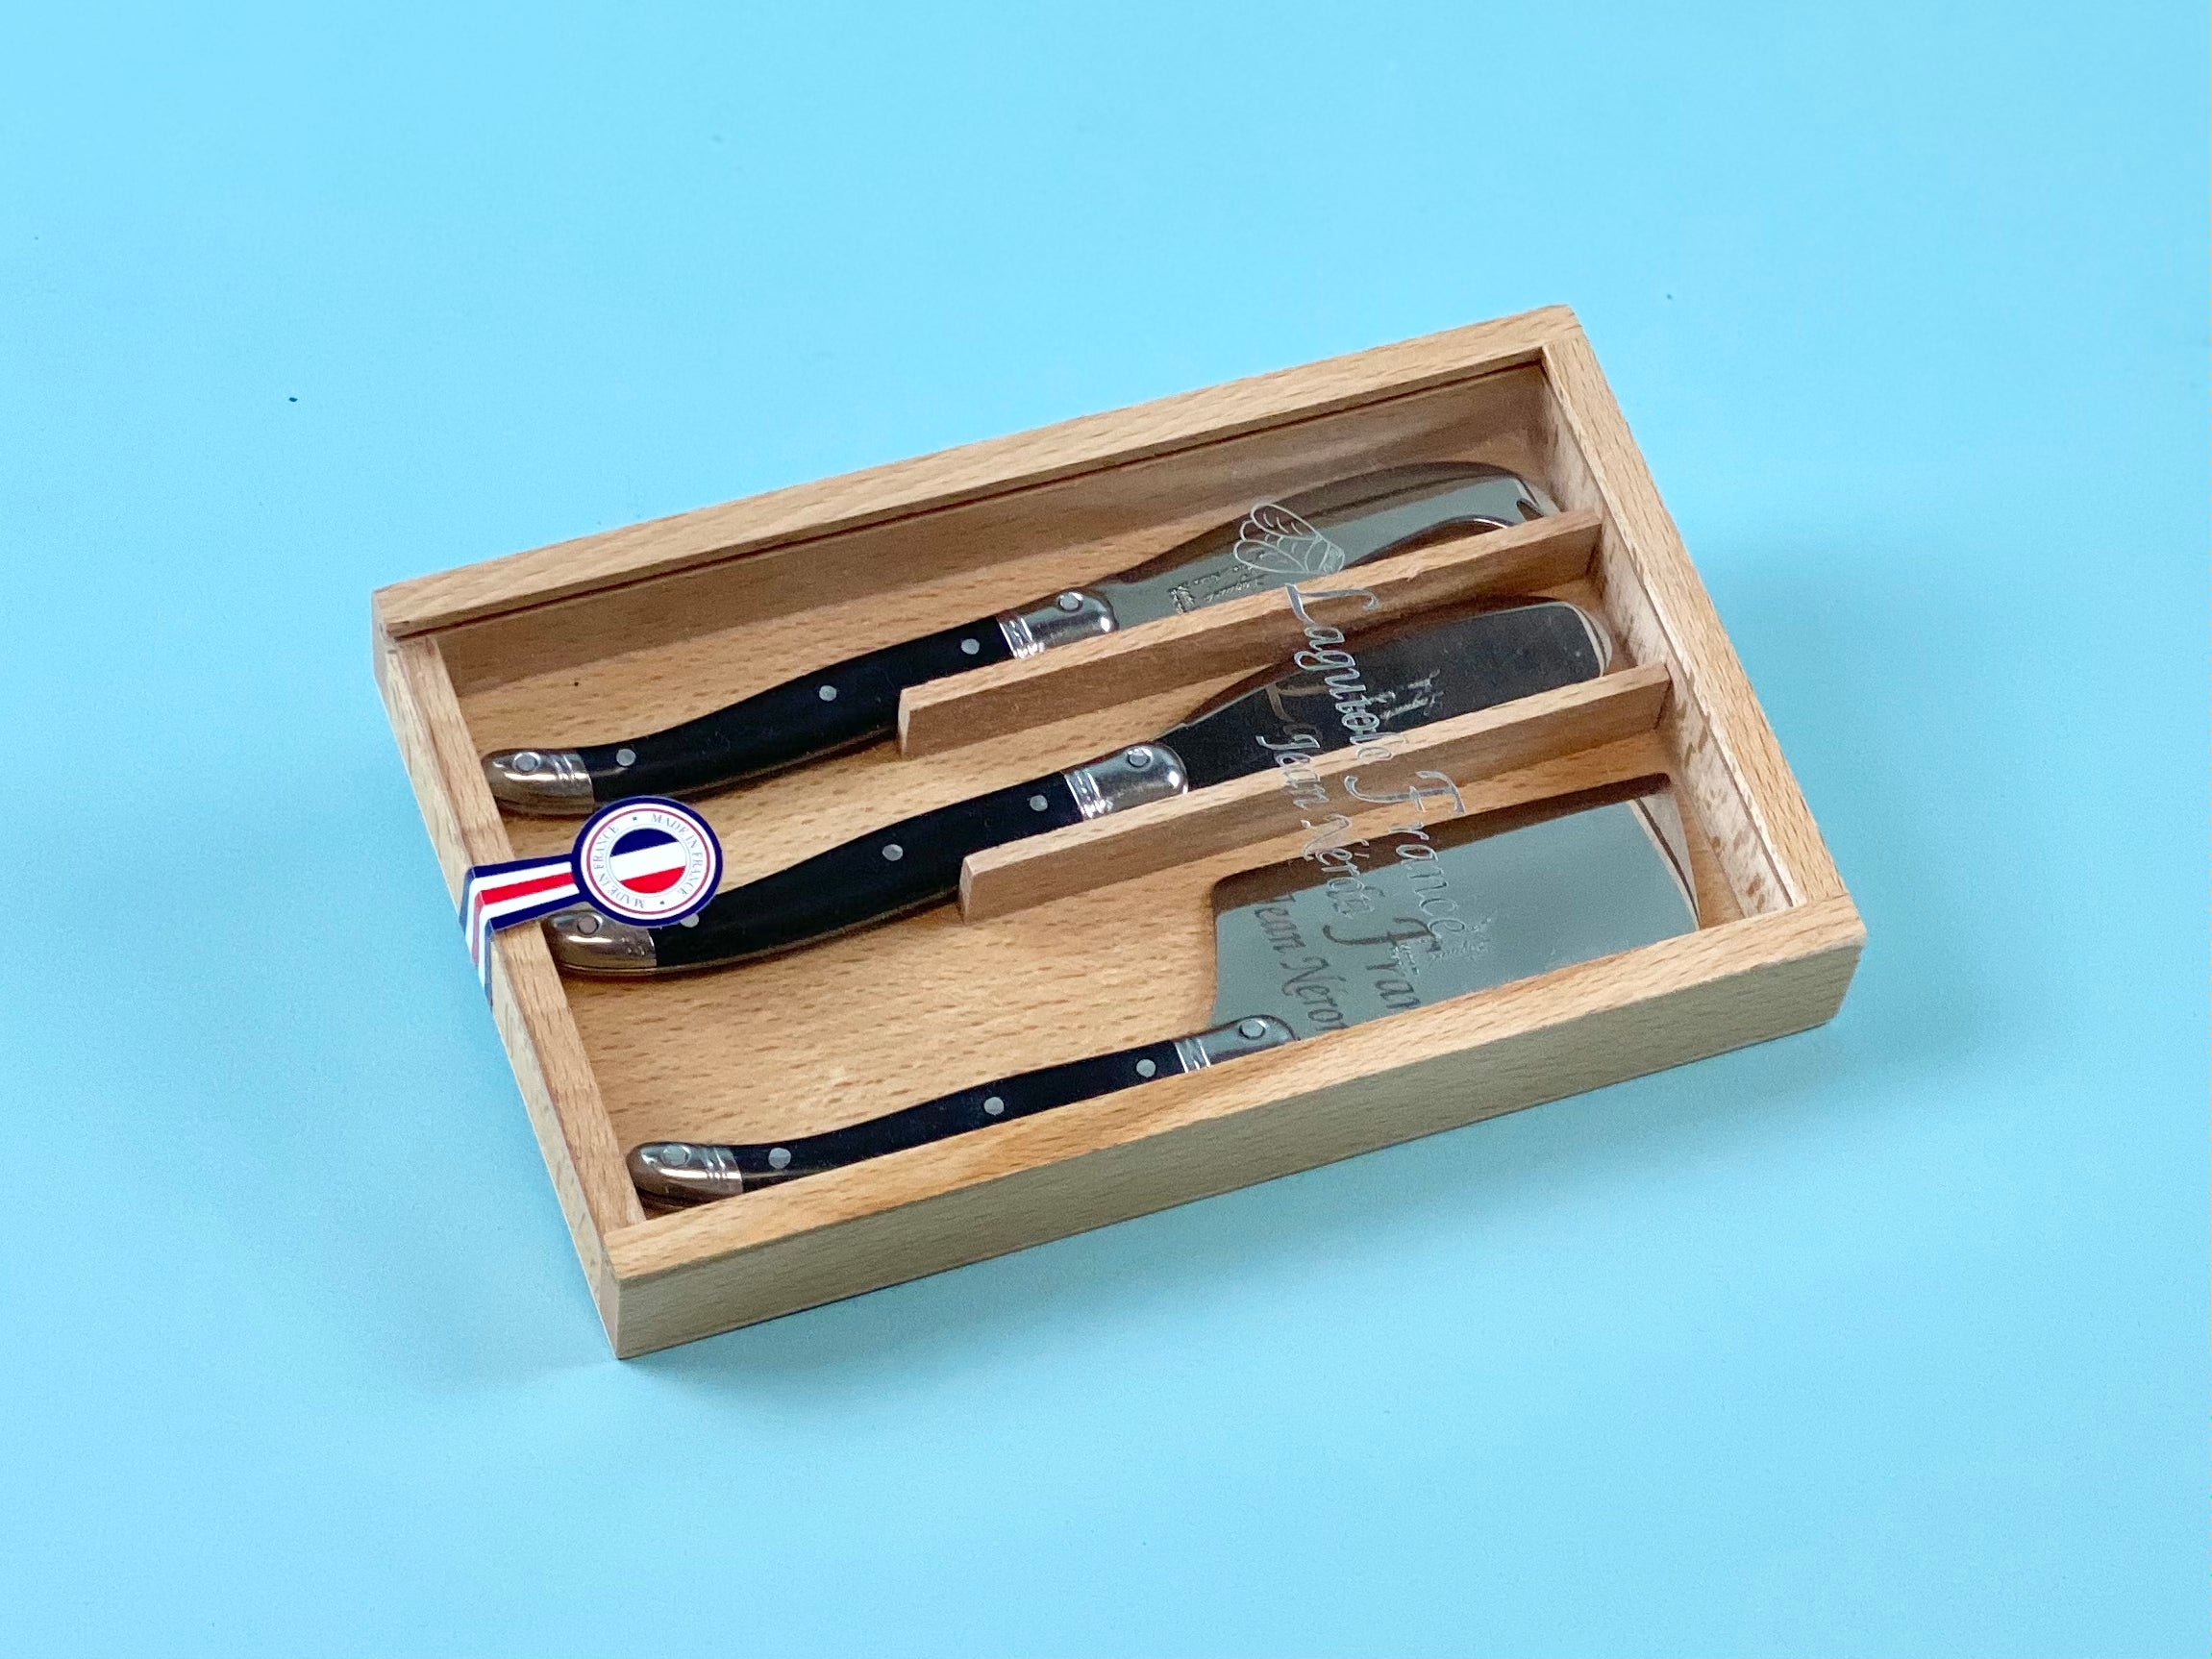 Laguiole Mini Black Cheese Set in Wooden Box with Acrylic Lid (Set of 3) Cutlery Set Laguiole Brand_Laguiole Cheese Sets Gift Sets Kitchen_Dinnerware Kitchen_Kitchenware Laguiole Loose Mini Rainbow Utensils Mini Cheese Sets 79003300BLK